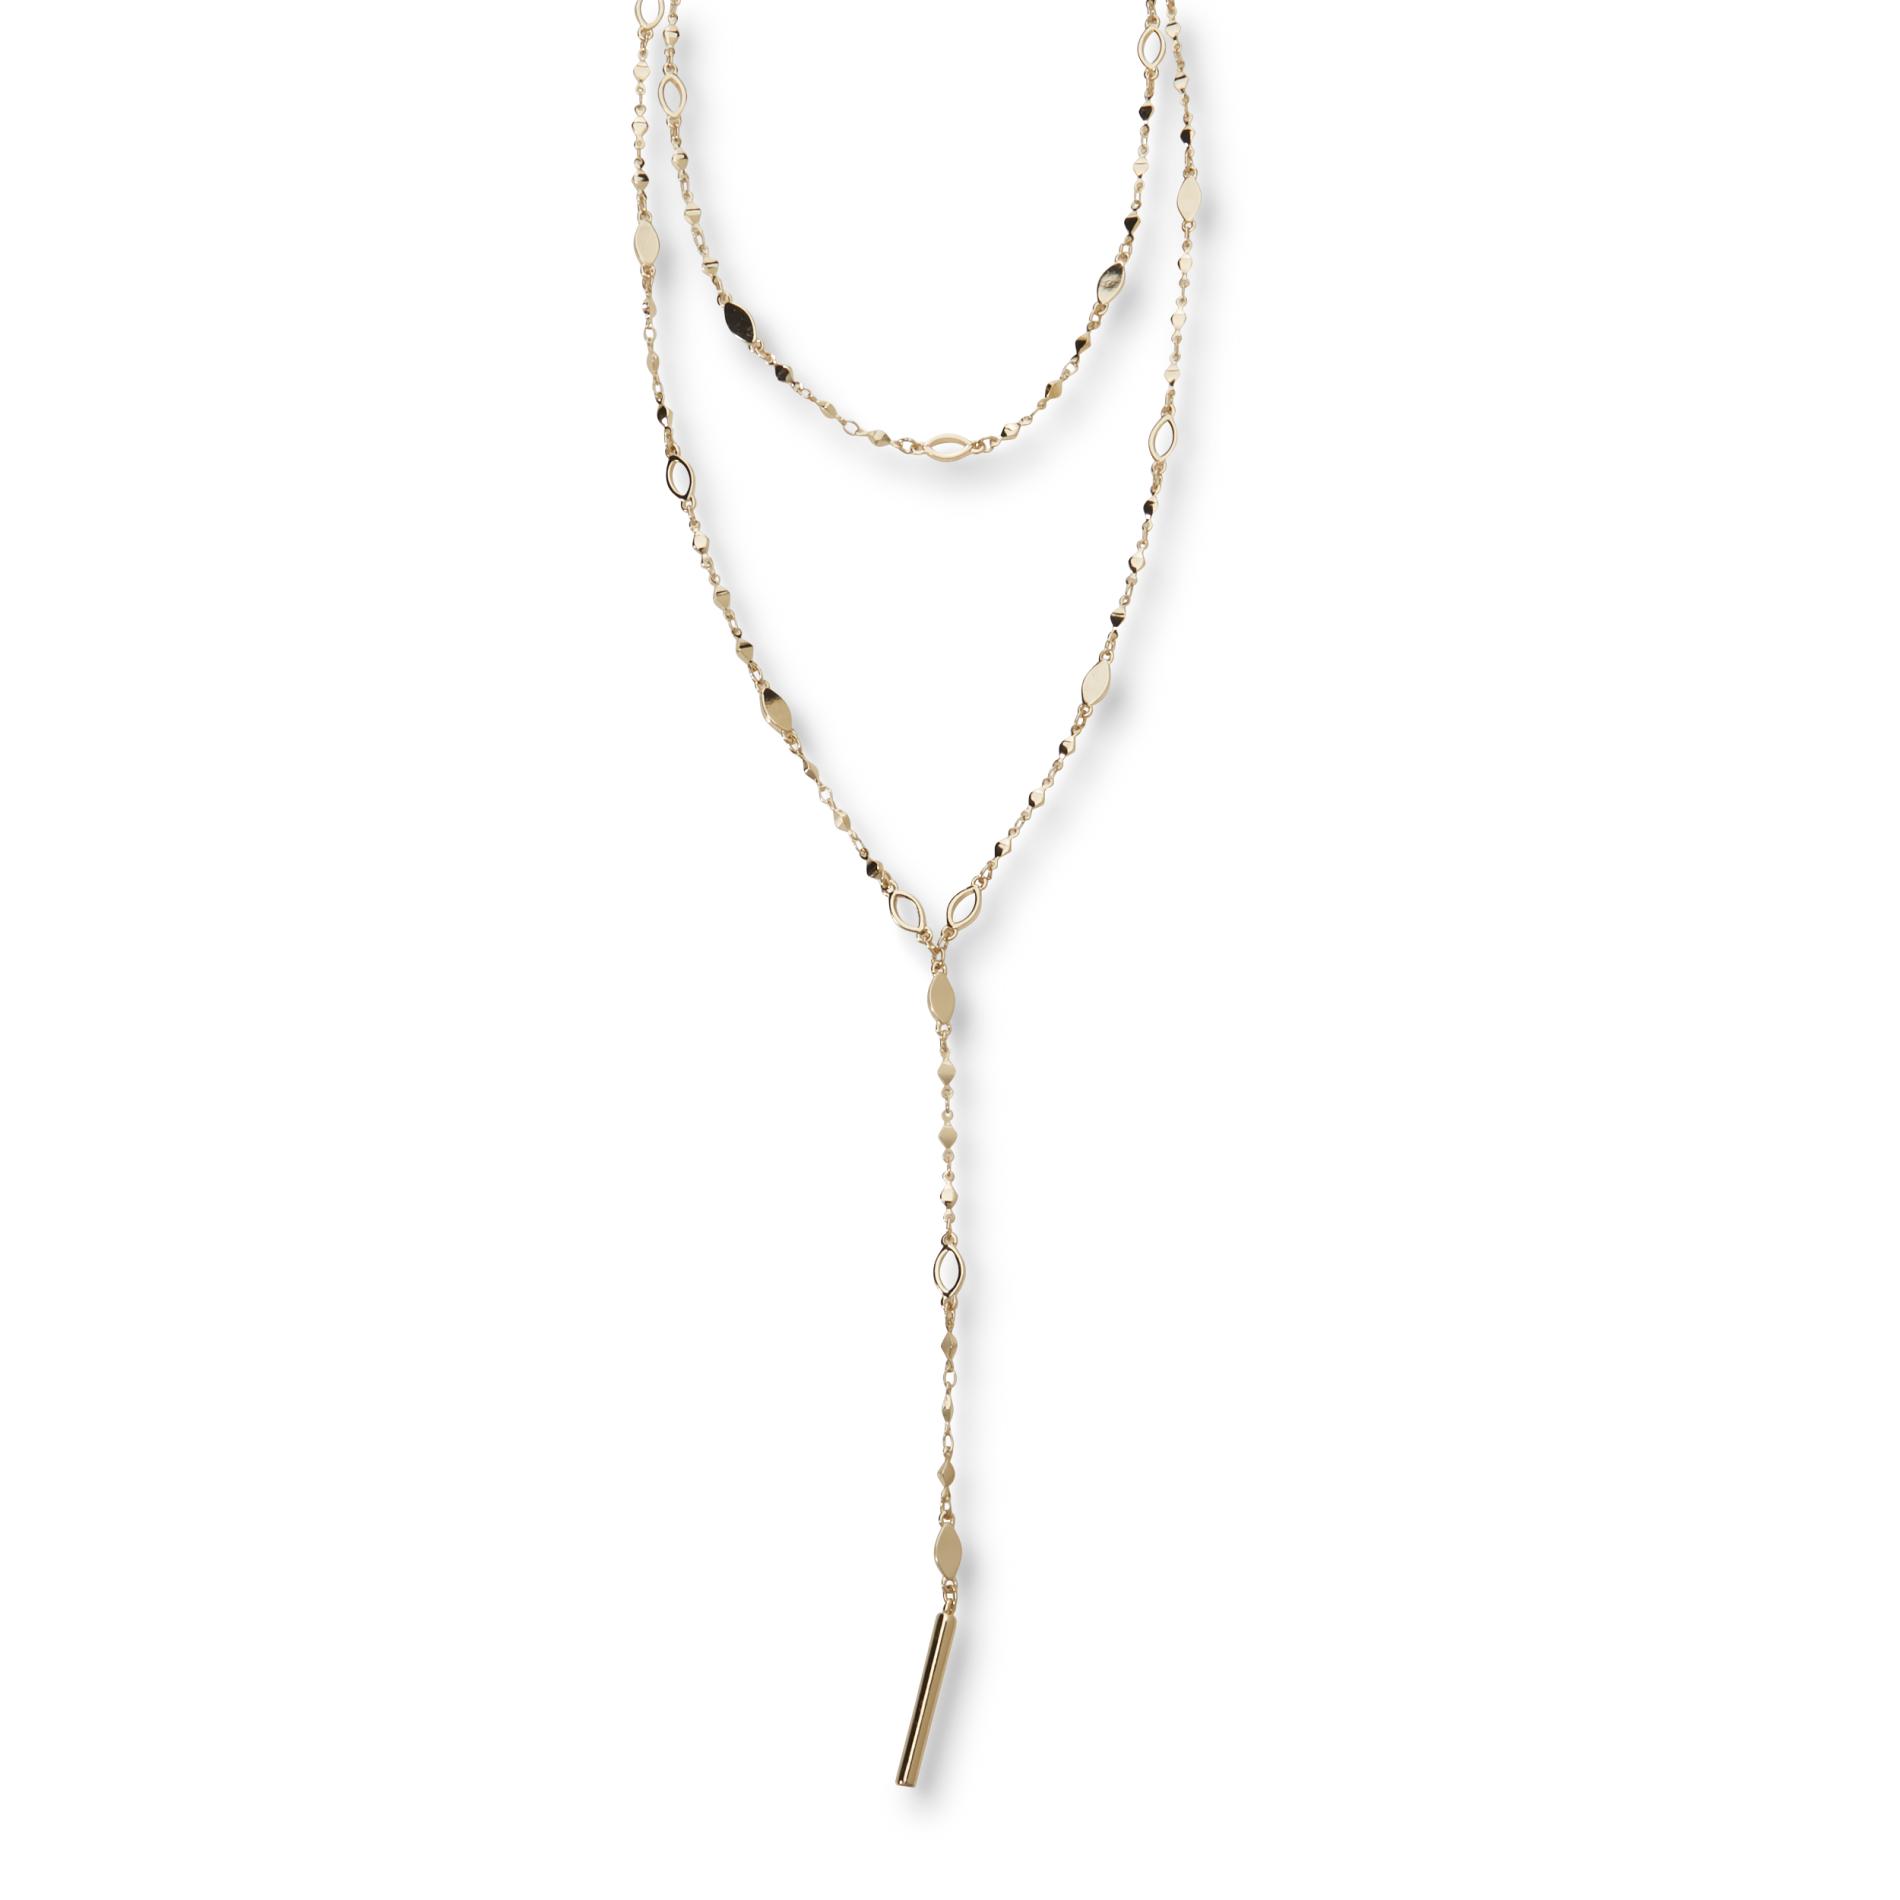 Women's Goldtone Layered-Look Necklace